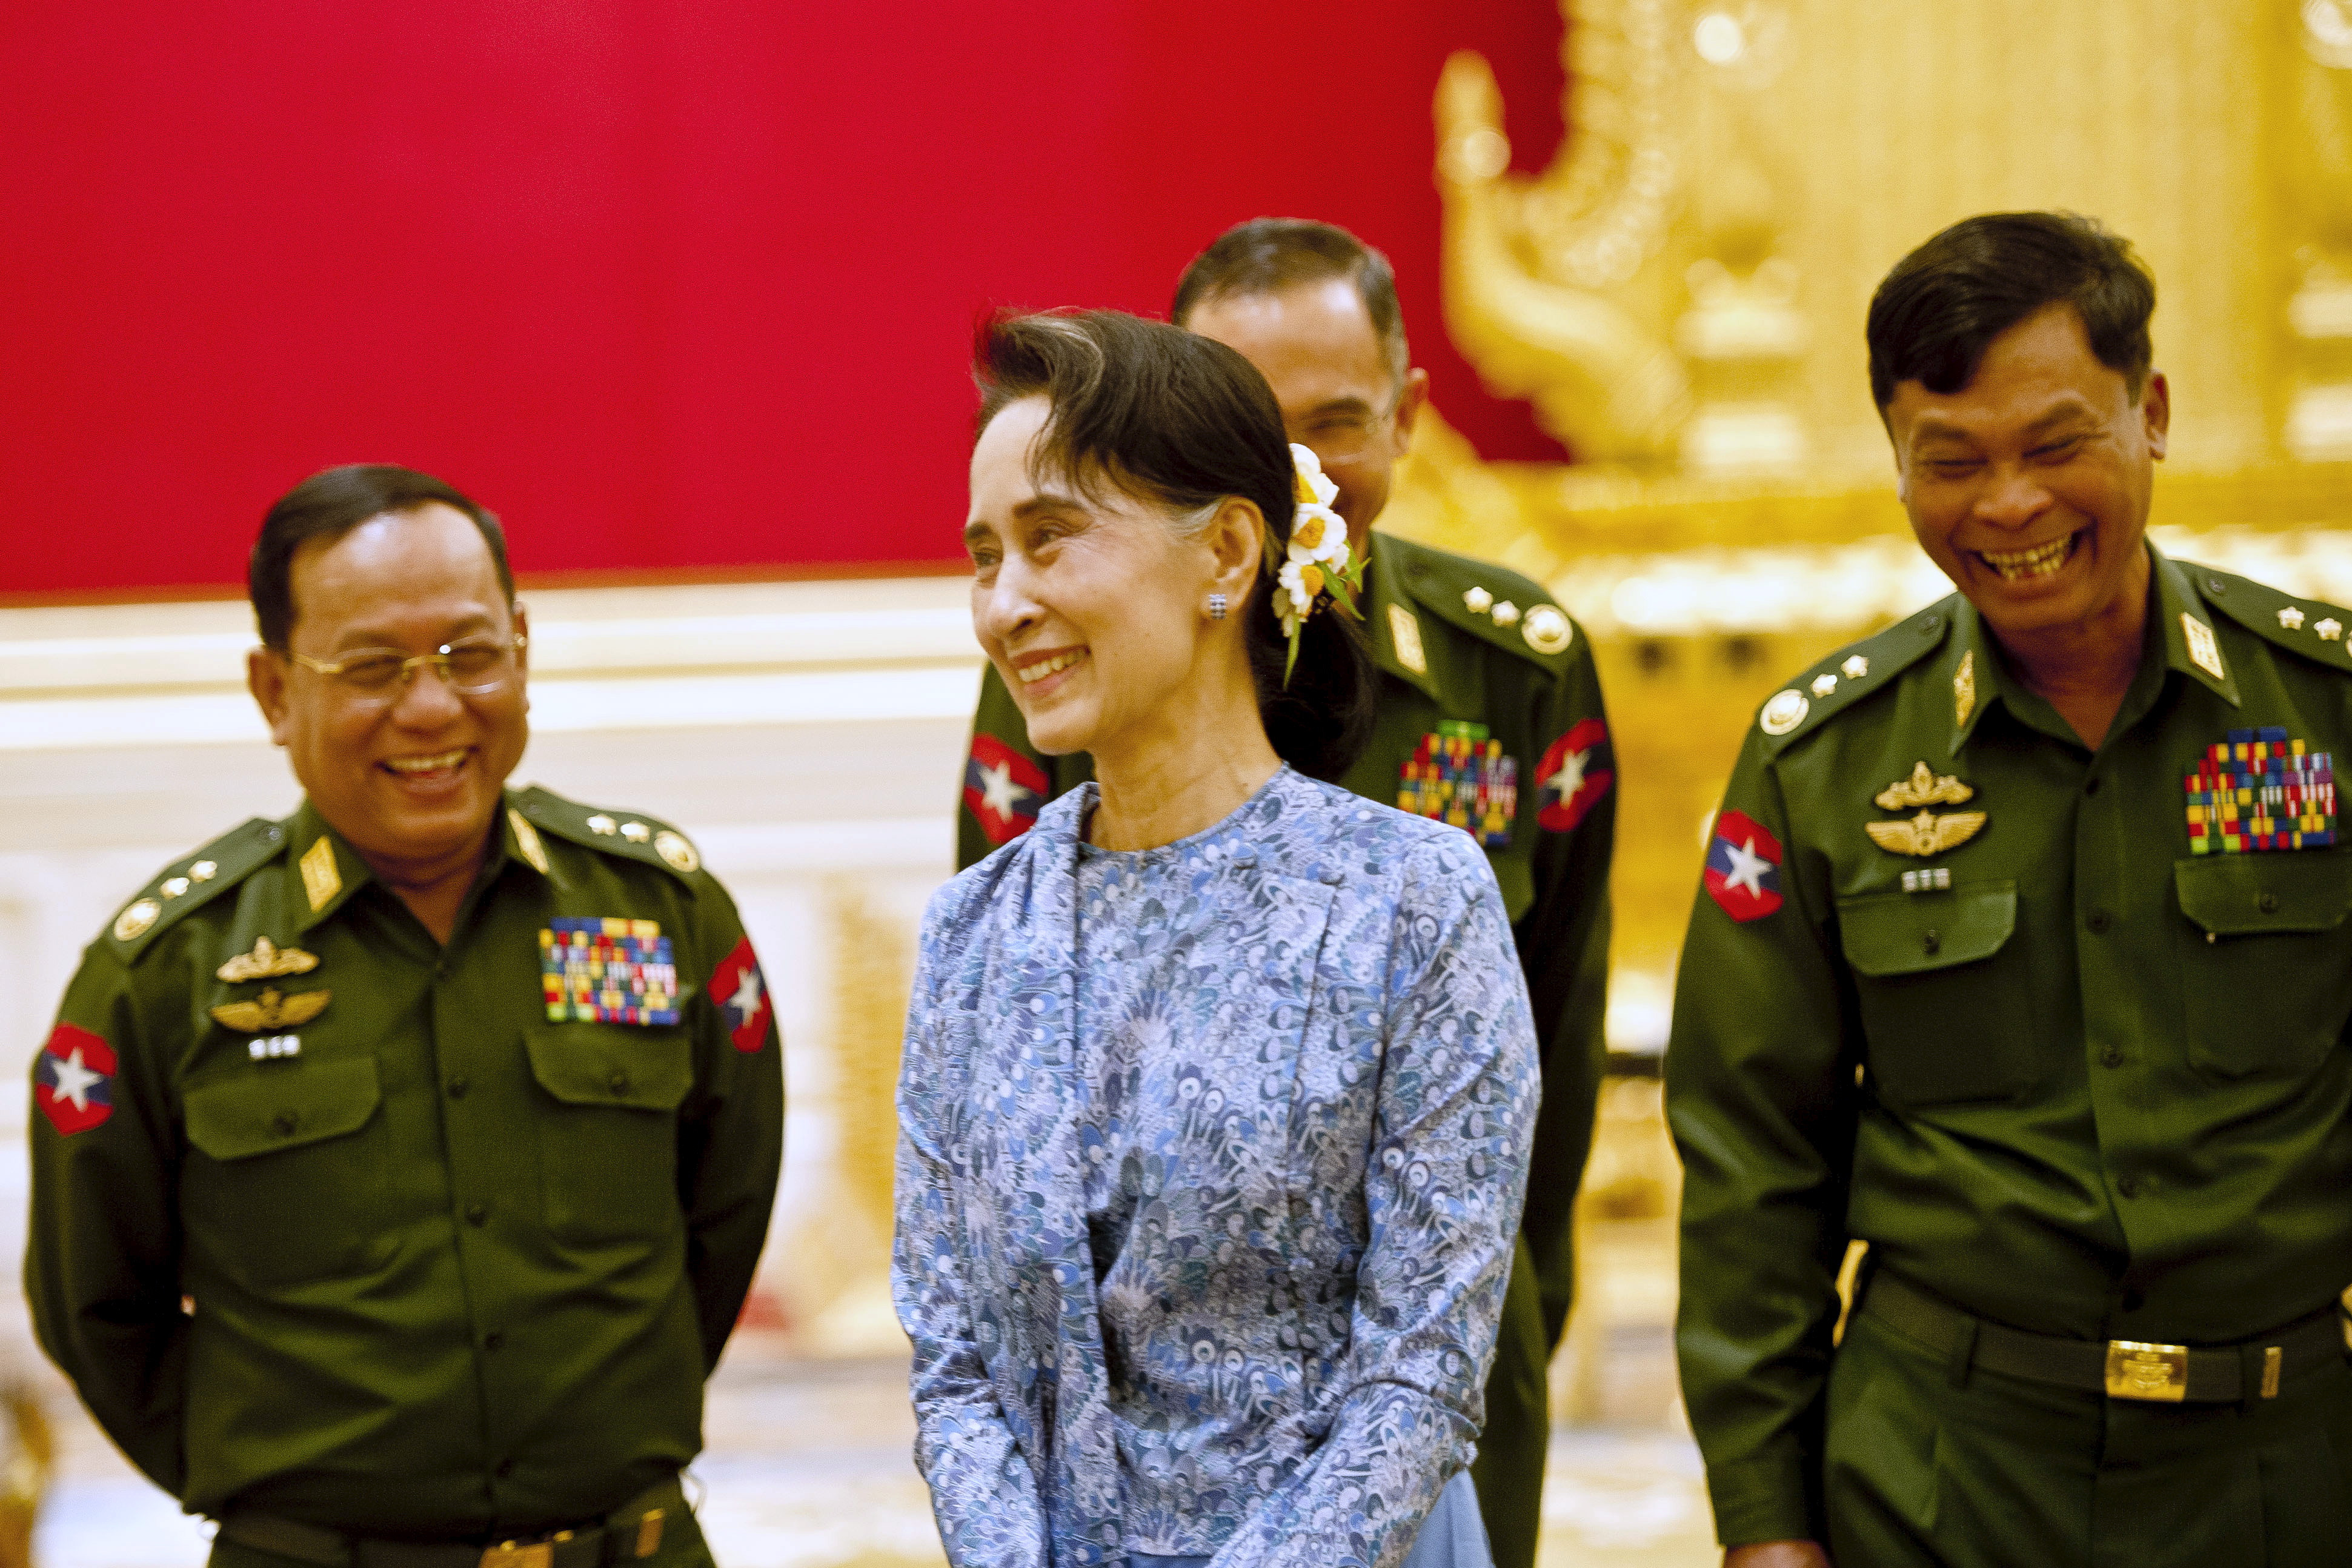 Aung San Suu Kyi, the National League for Democracy party's leader, smiles with army members during the handover ceremony at the presidential palace in Naypyitaw, Burma, on March 30, 2016 (Pool—Reuters)